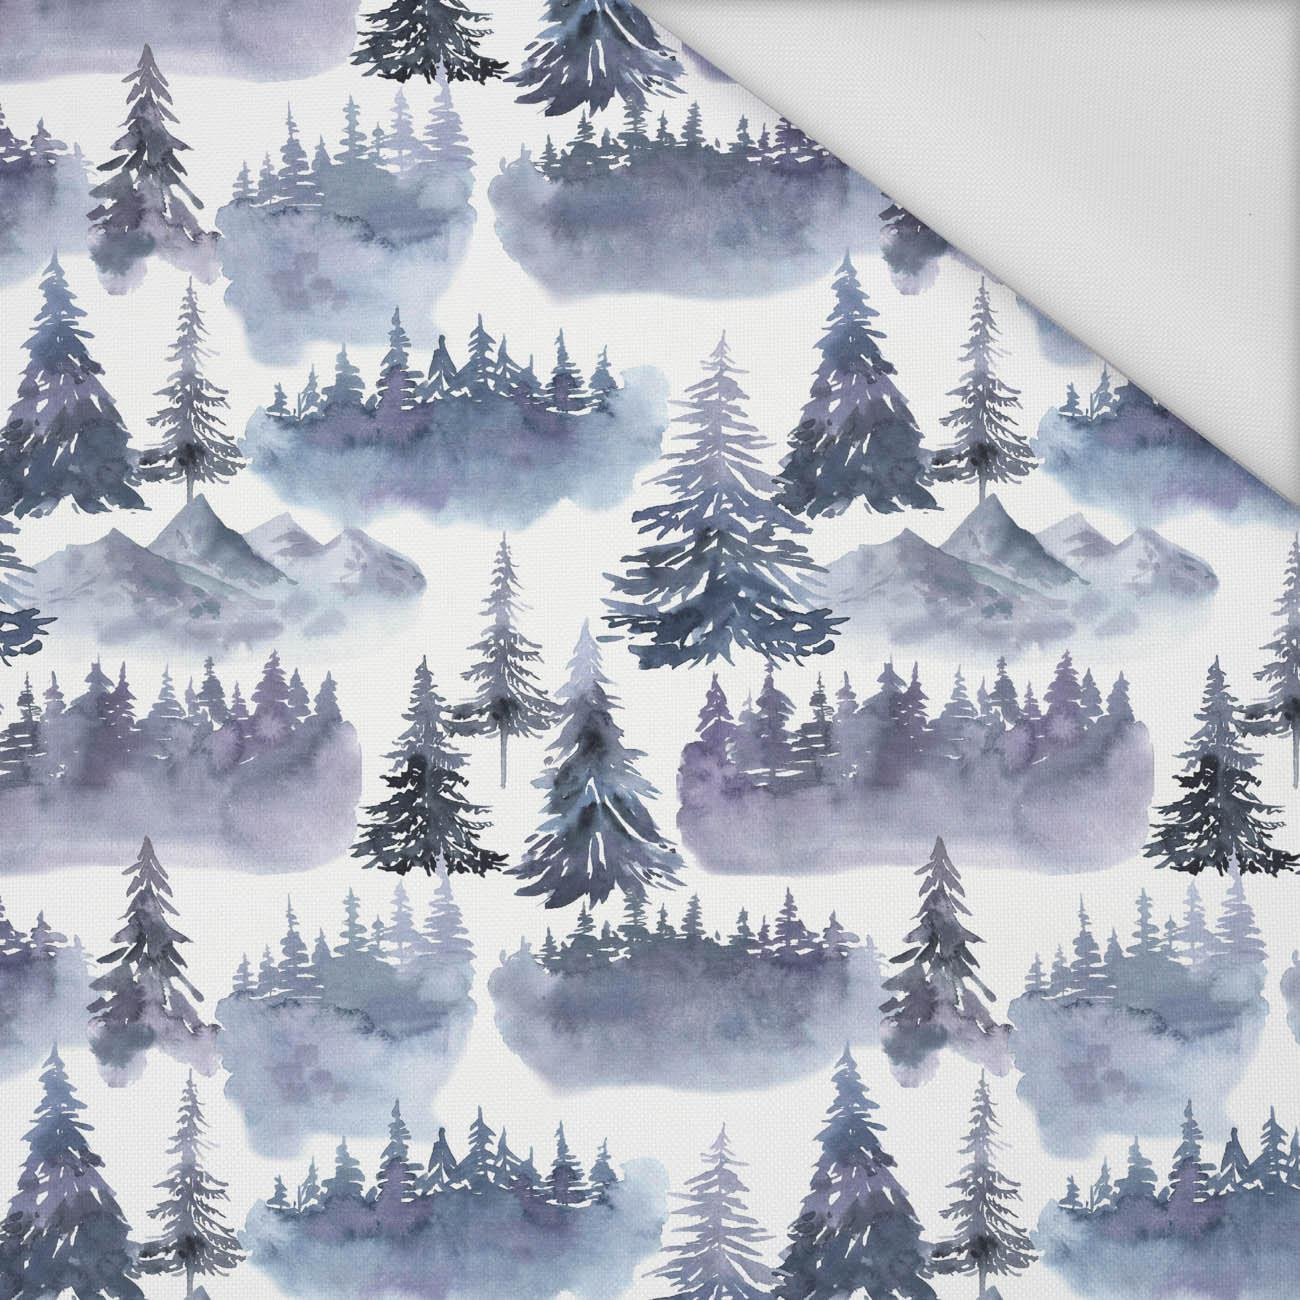 FOREST LANDSCAPE (PAINTED FOREST) - Waterproof woven fabric